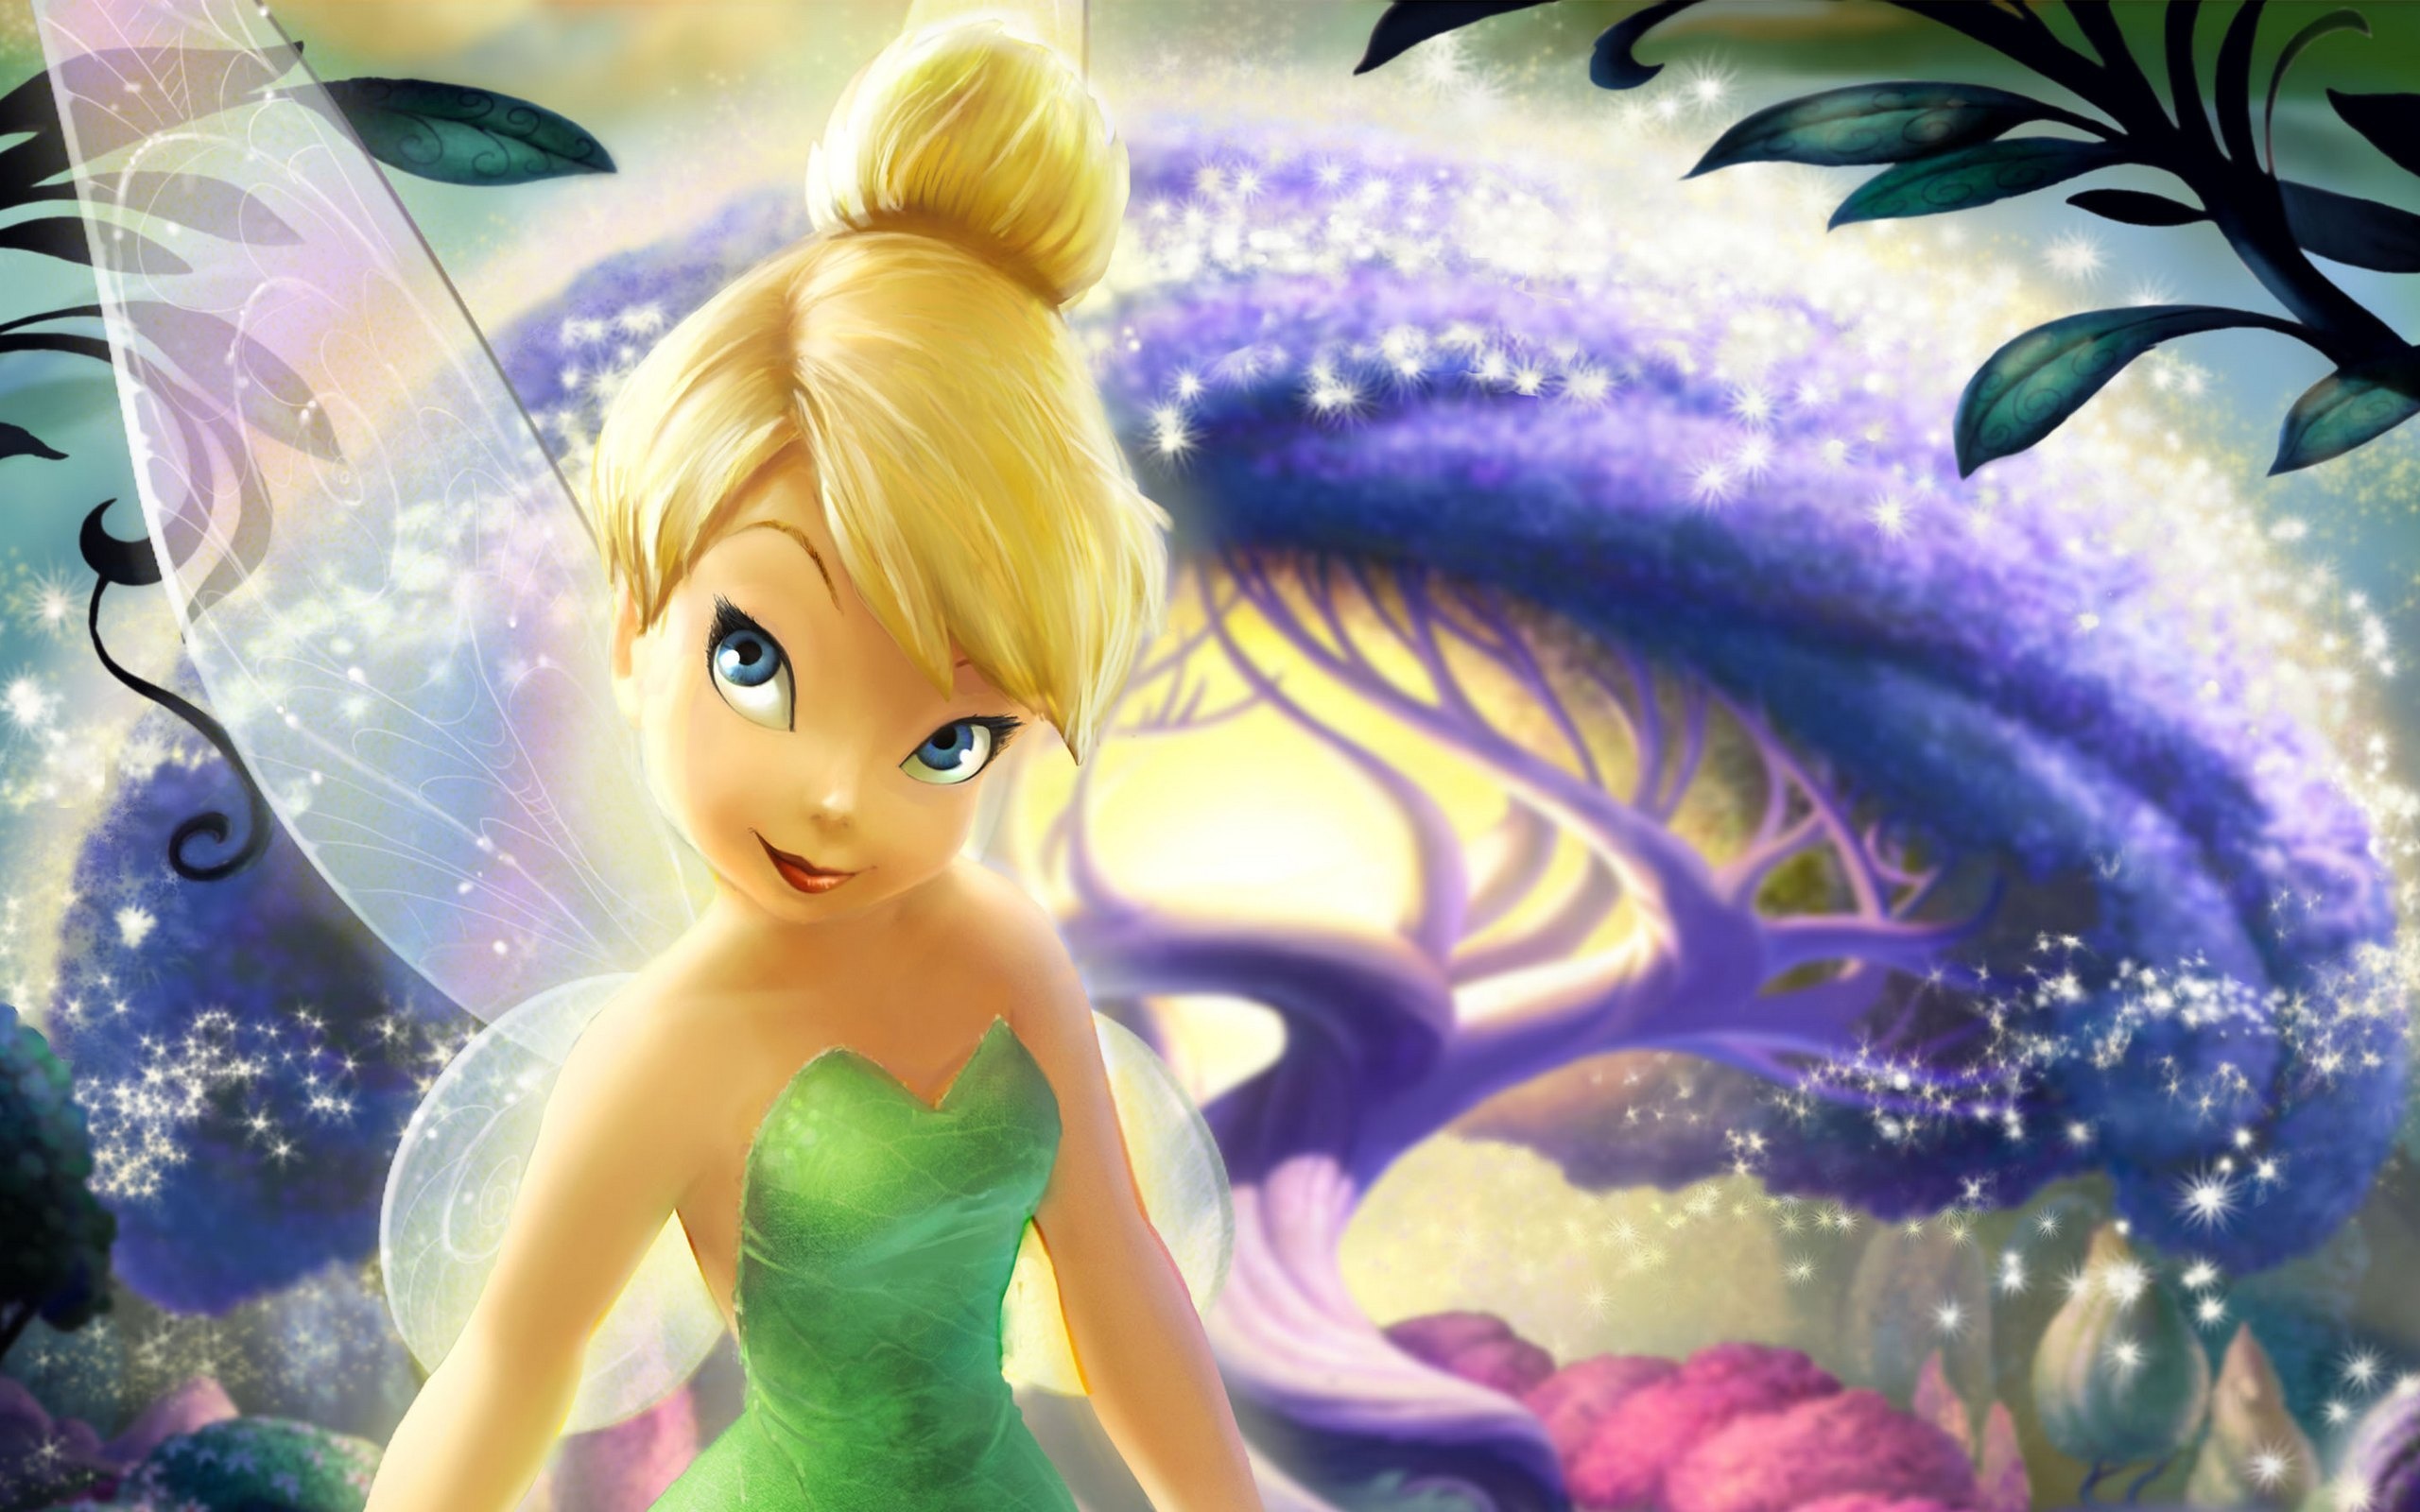 Magical forest wallpapers, Fairy wings and stars, Disney movie, Enchanting fantasy, 2560x1600 HD Desktop